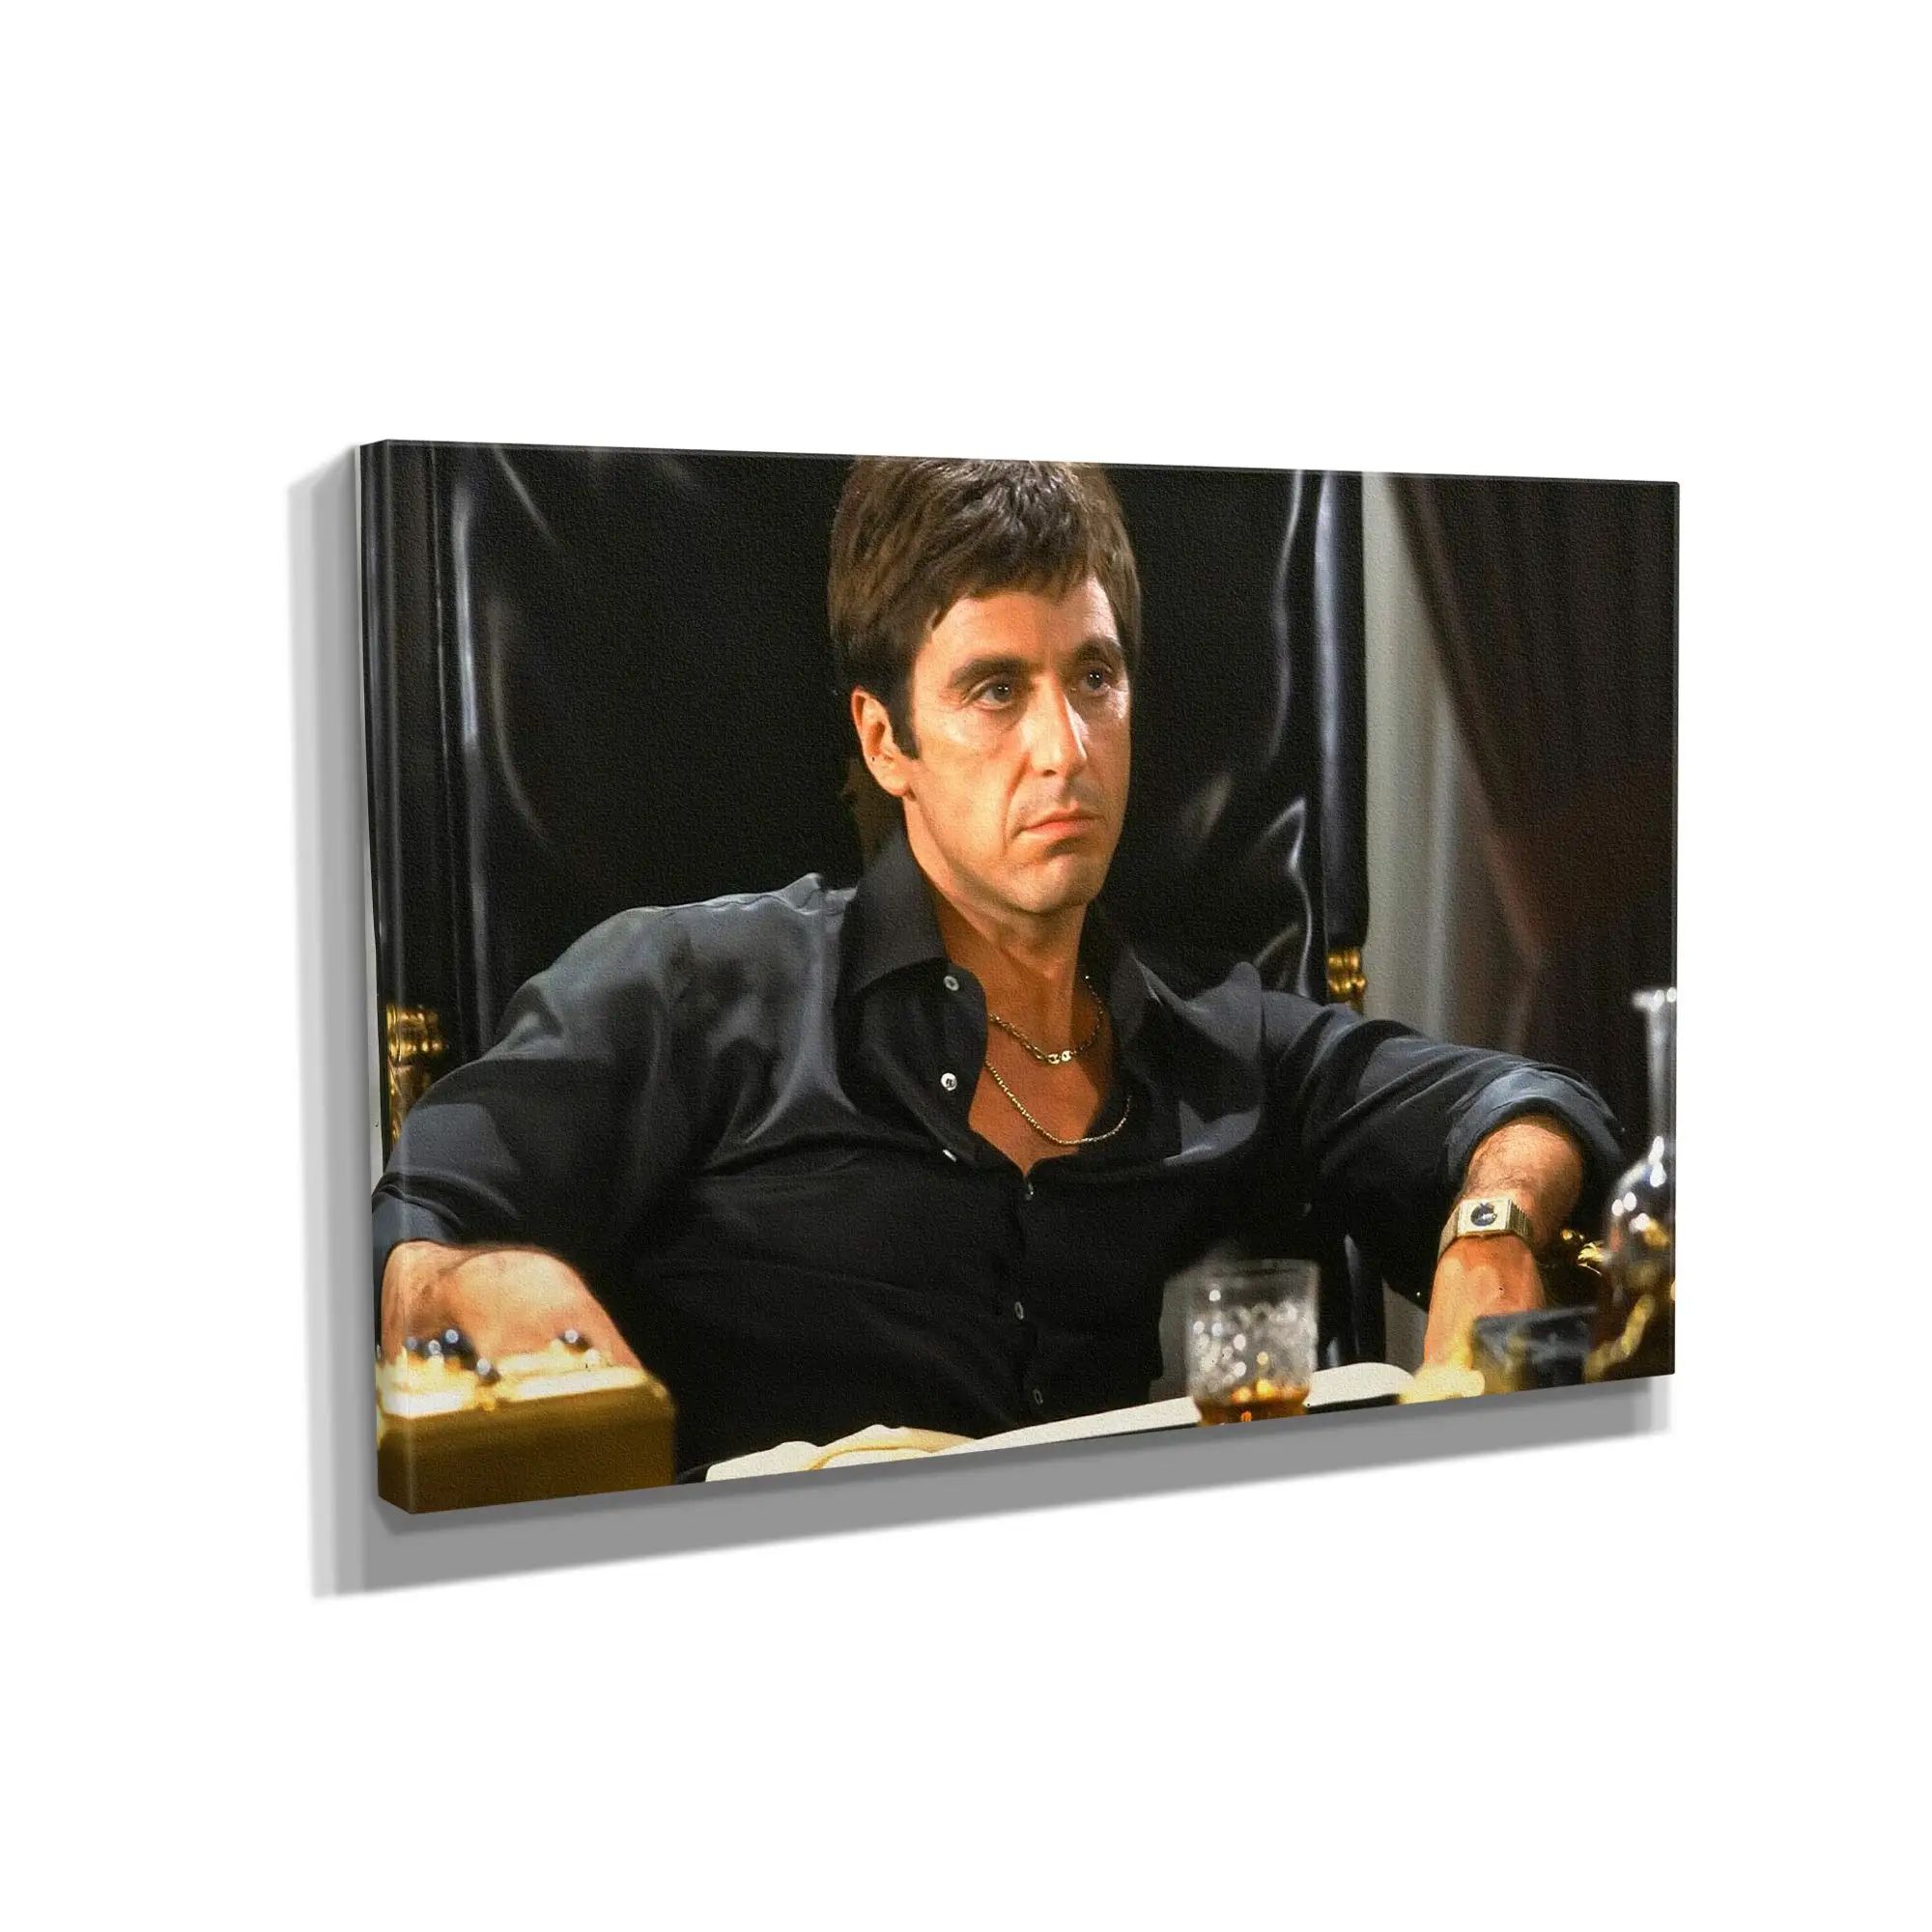 

Gallery Wrapped World Famous Actors Horizontal Scarface Al Pacino Movie Painting Canvas Print Art Home Decor Wall Art Decor